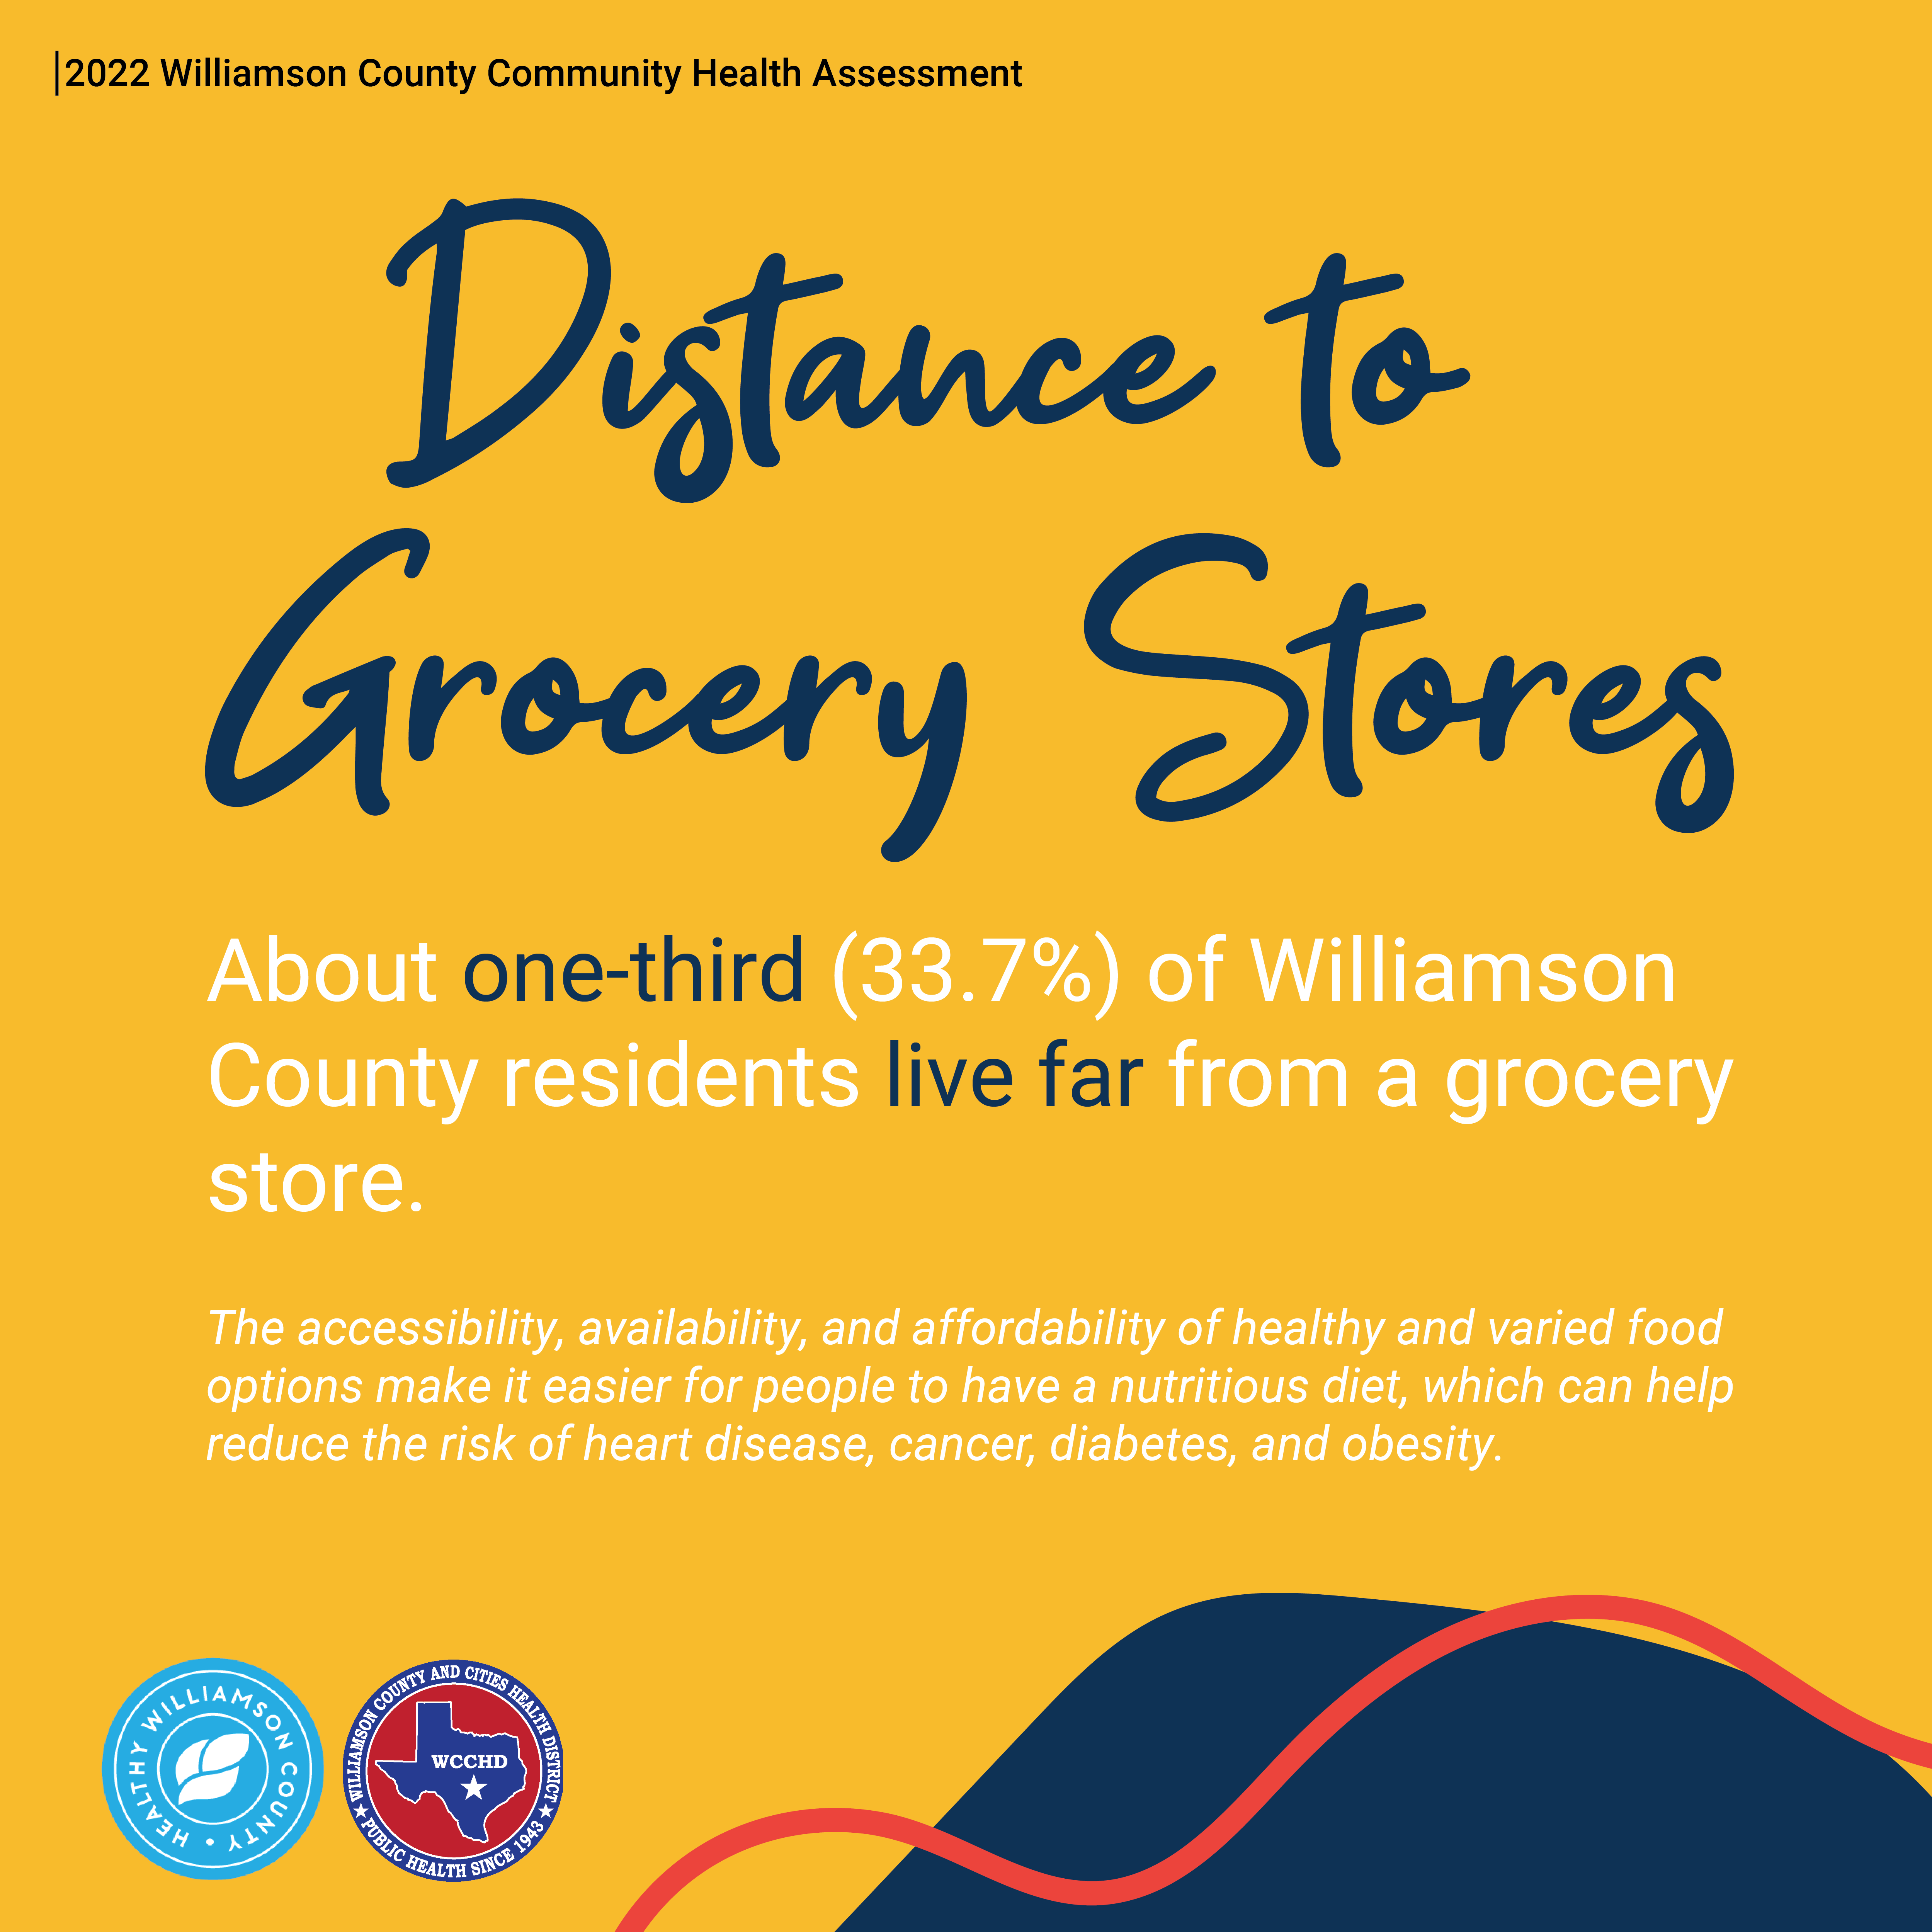 2022 Williamson County Community Health Assessment. Distance to Grocery Stores. About one-third (33.7%) of Williamson County residents live far from a grocery store. The accessibility, availability, and affordability of healthy and varied food options make it easier for people to have a nutritious diet, which can help reduce the risk of heart disease, cancer, diabetes, and obesity. Blob and squiggly line in bottom right corner. Logos of Healthy Williamson County and Williamson County and Cities Health District.